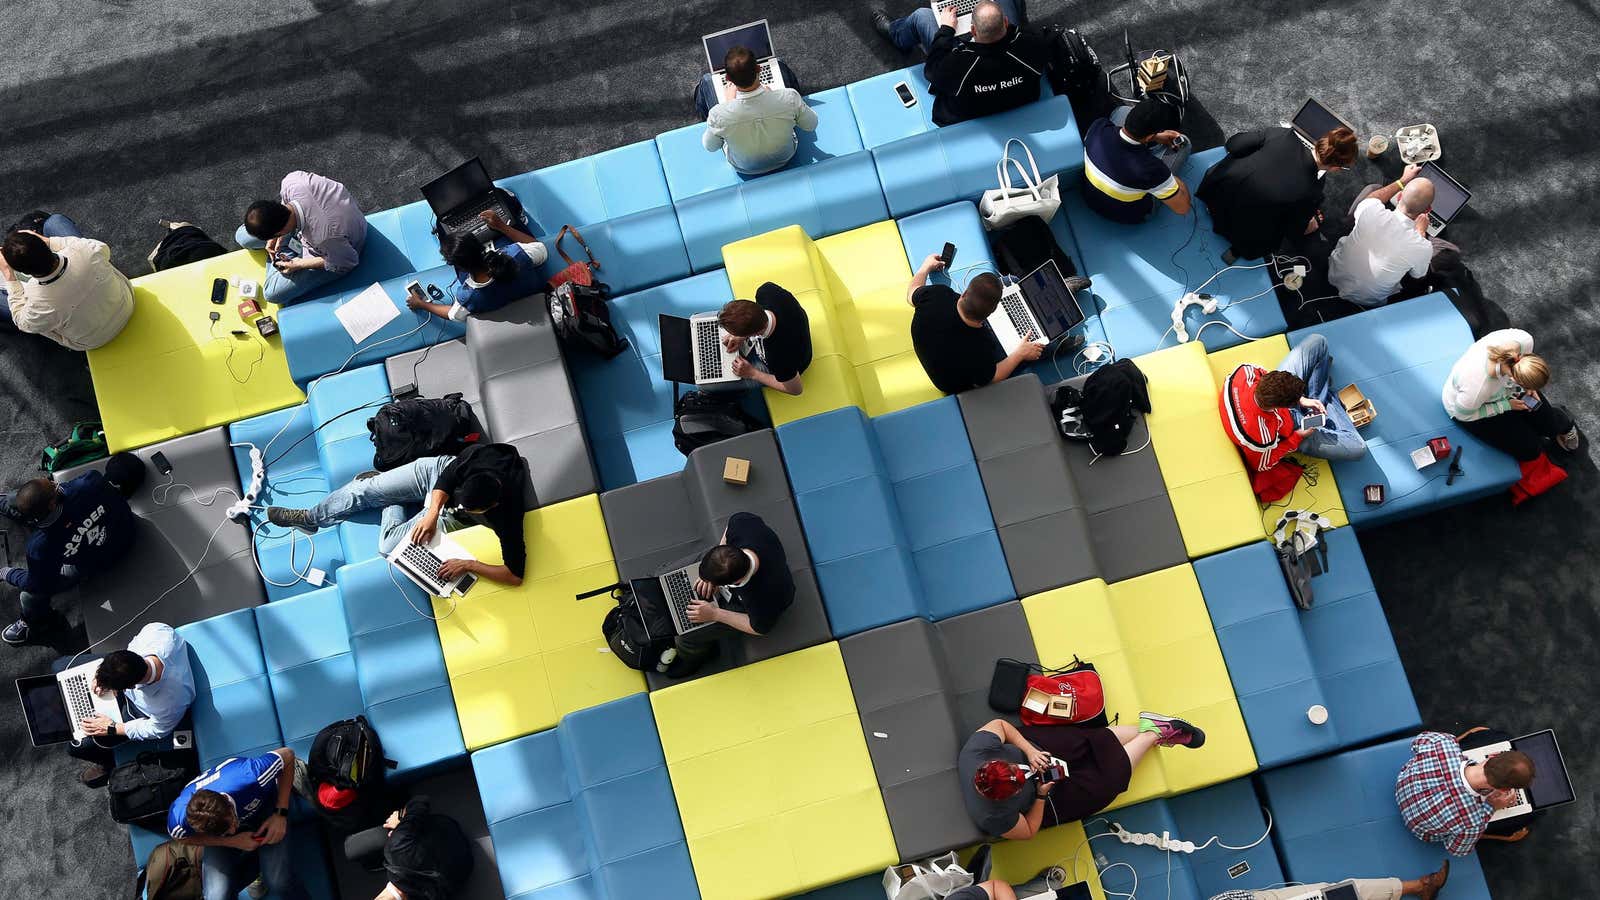 Attendees use their laptops at the Google I/O developers conference in San Francisco in 2014.